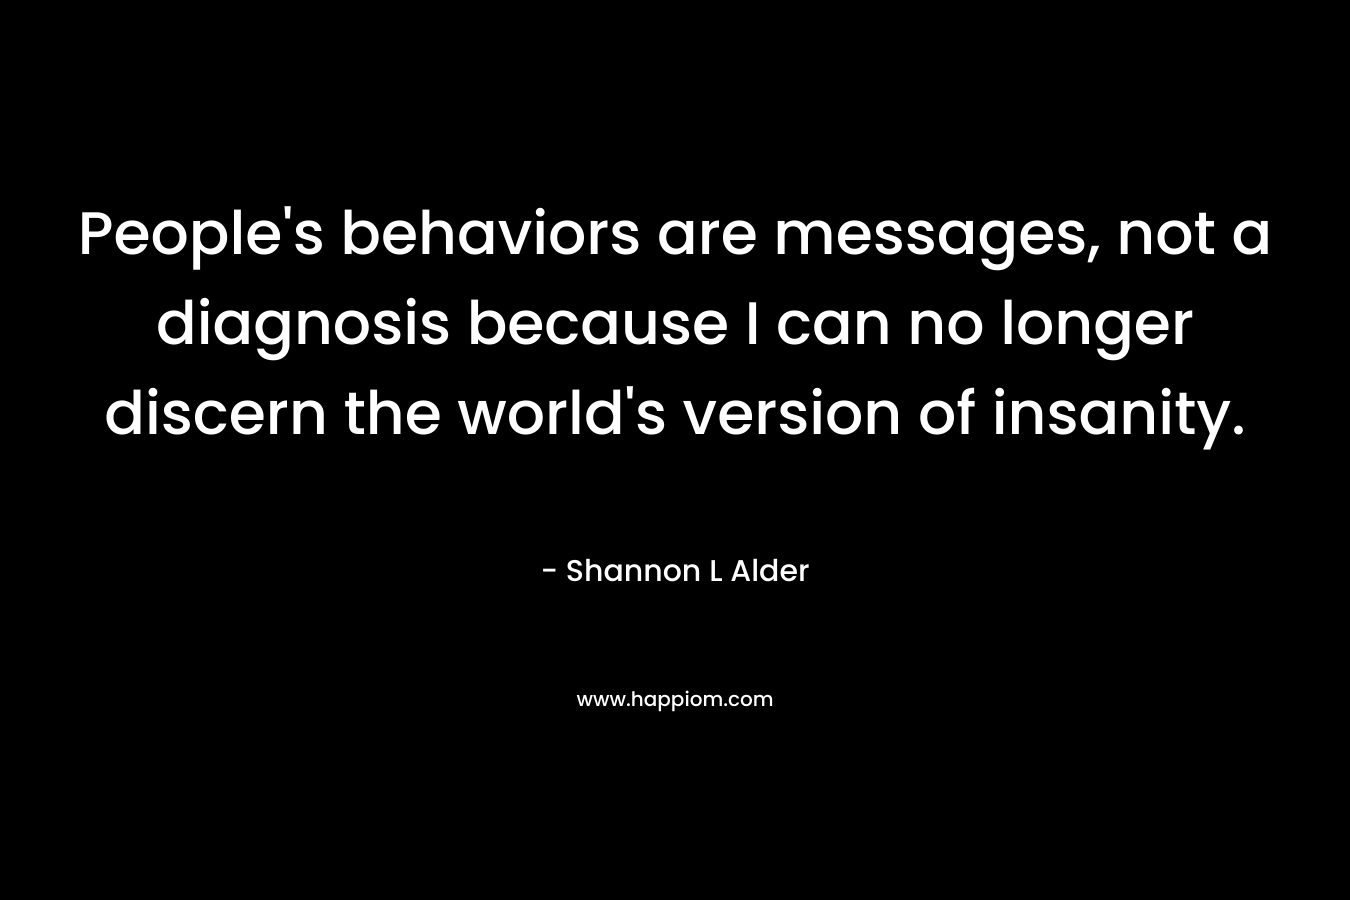 People's behaviors are messages, not a diagnosis because I can no longer discern the world's version of insanity.